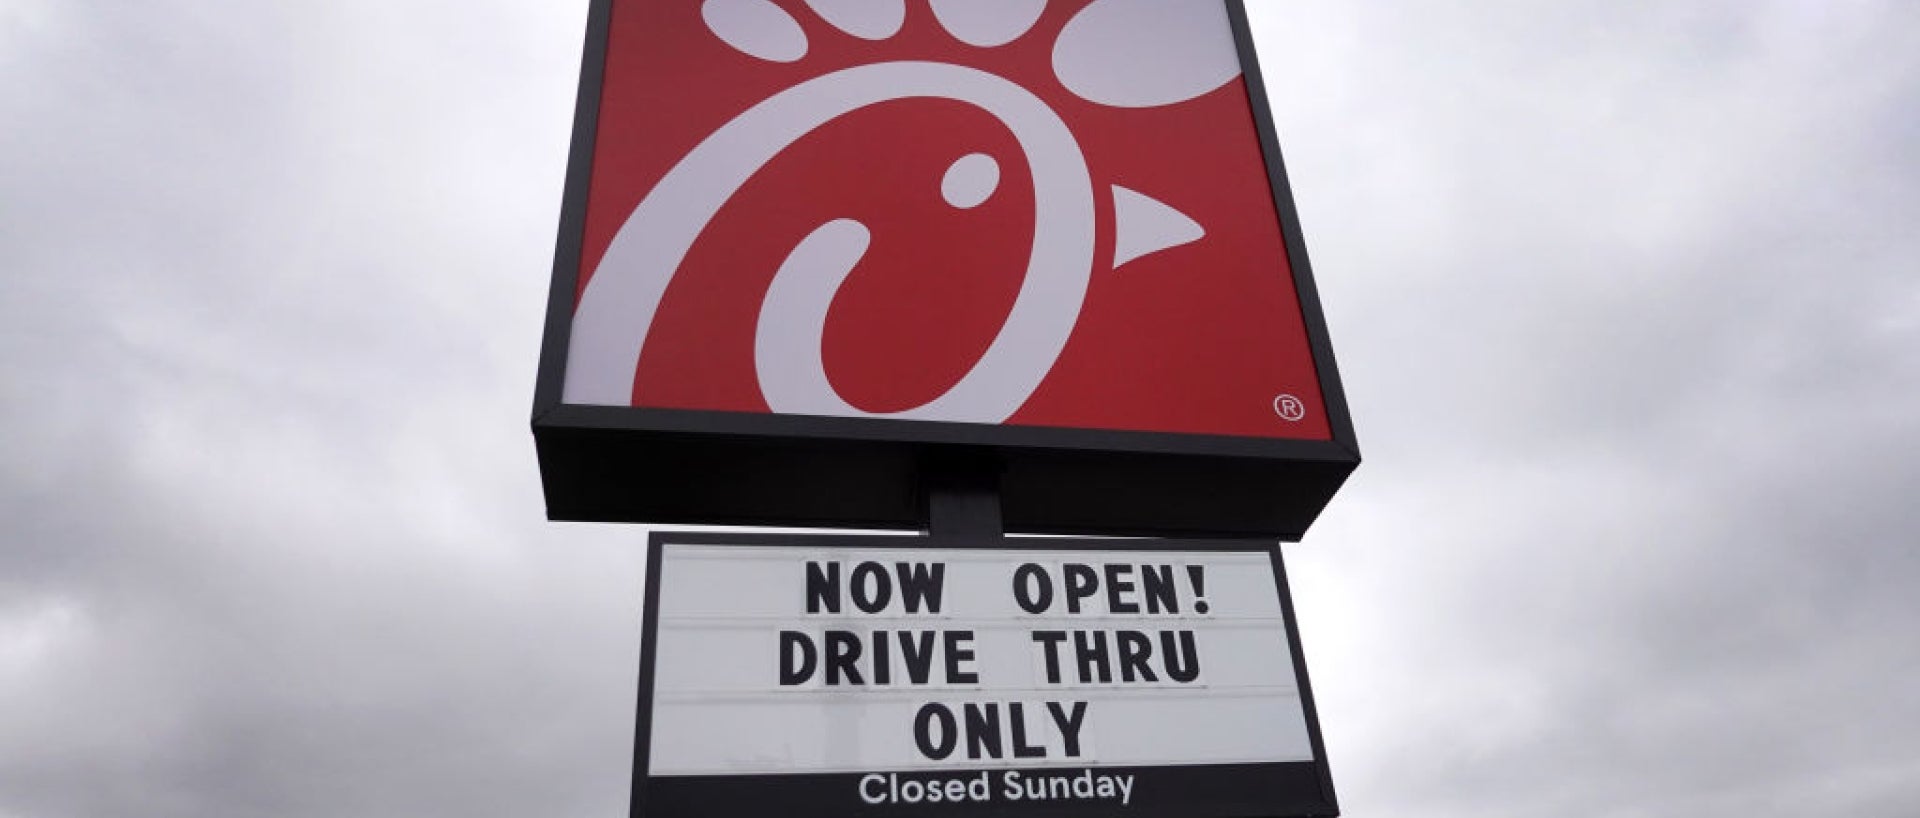 Sign of chick-fil-a